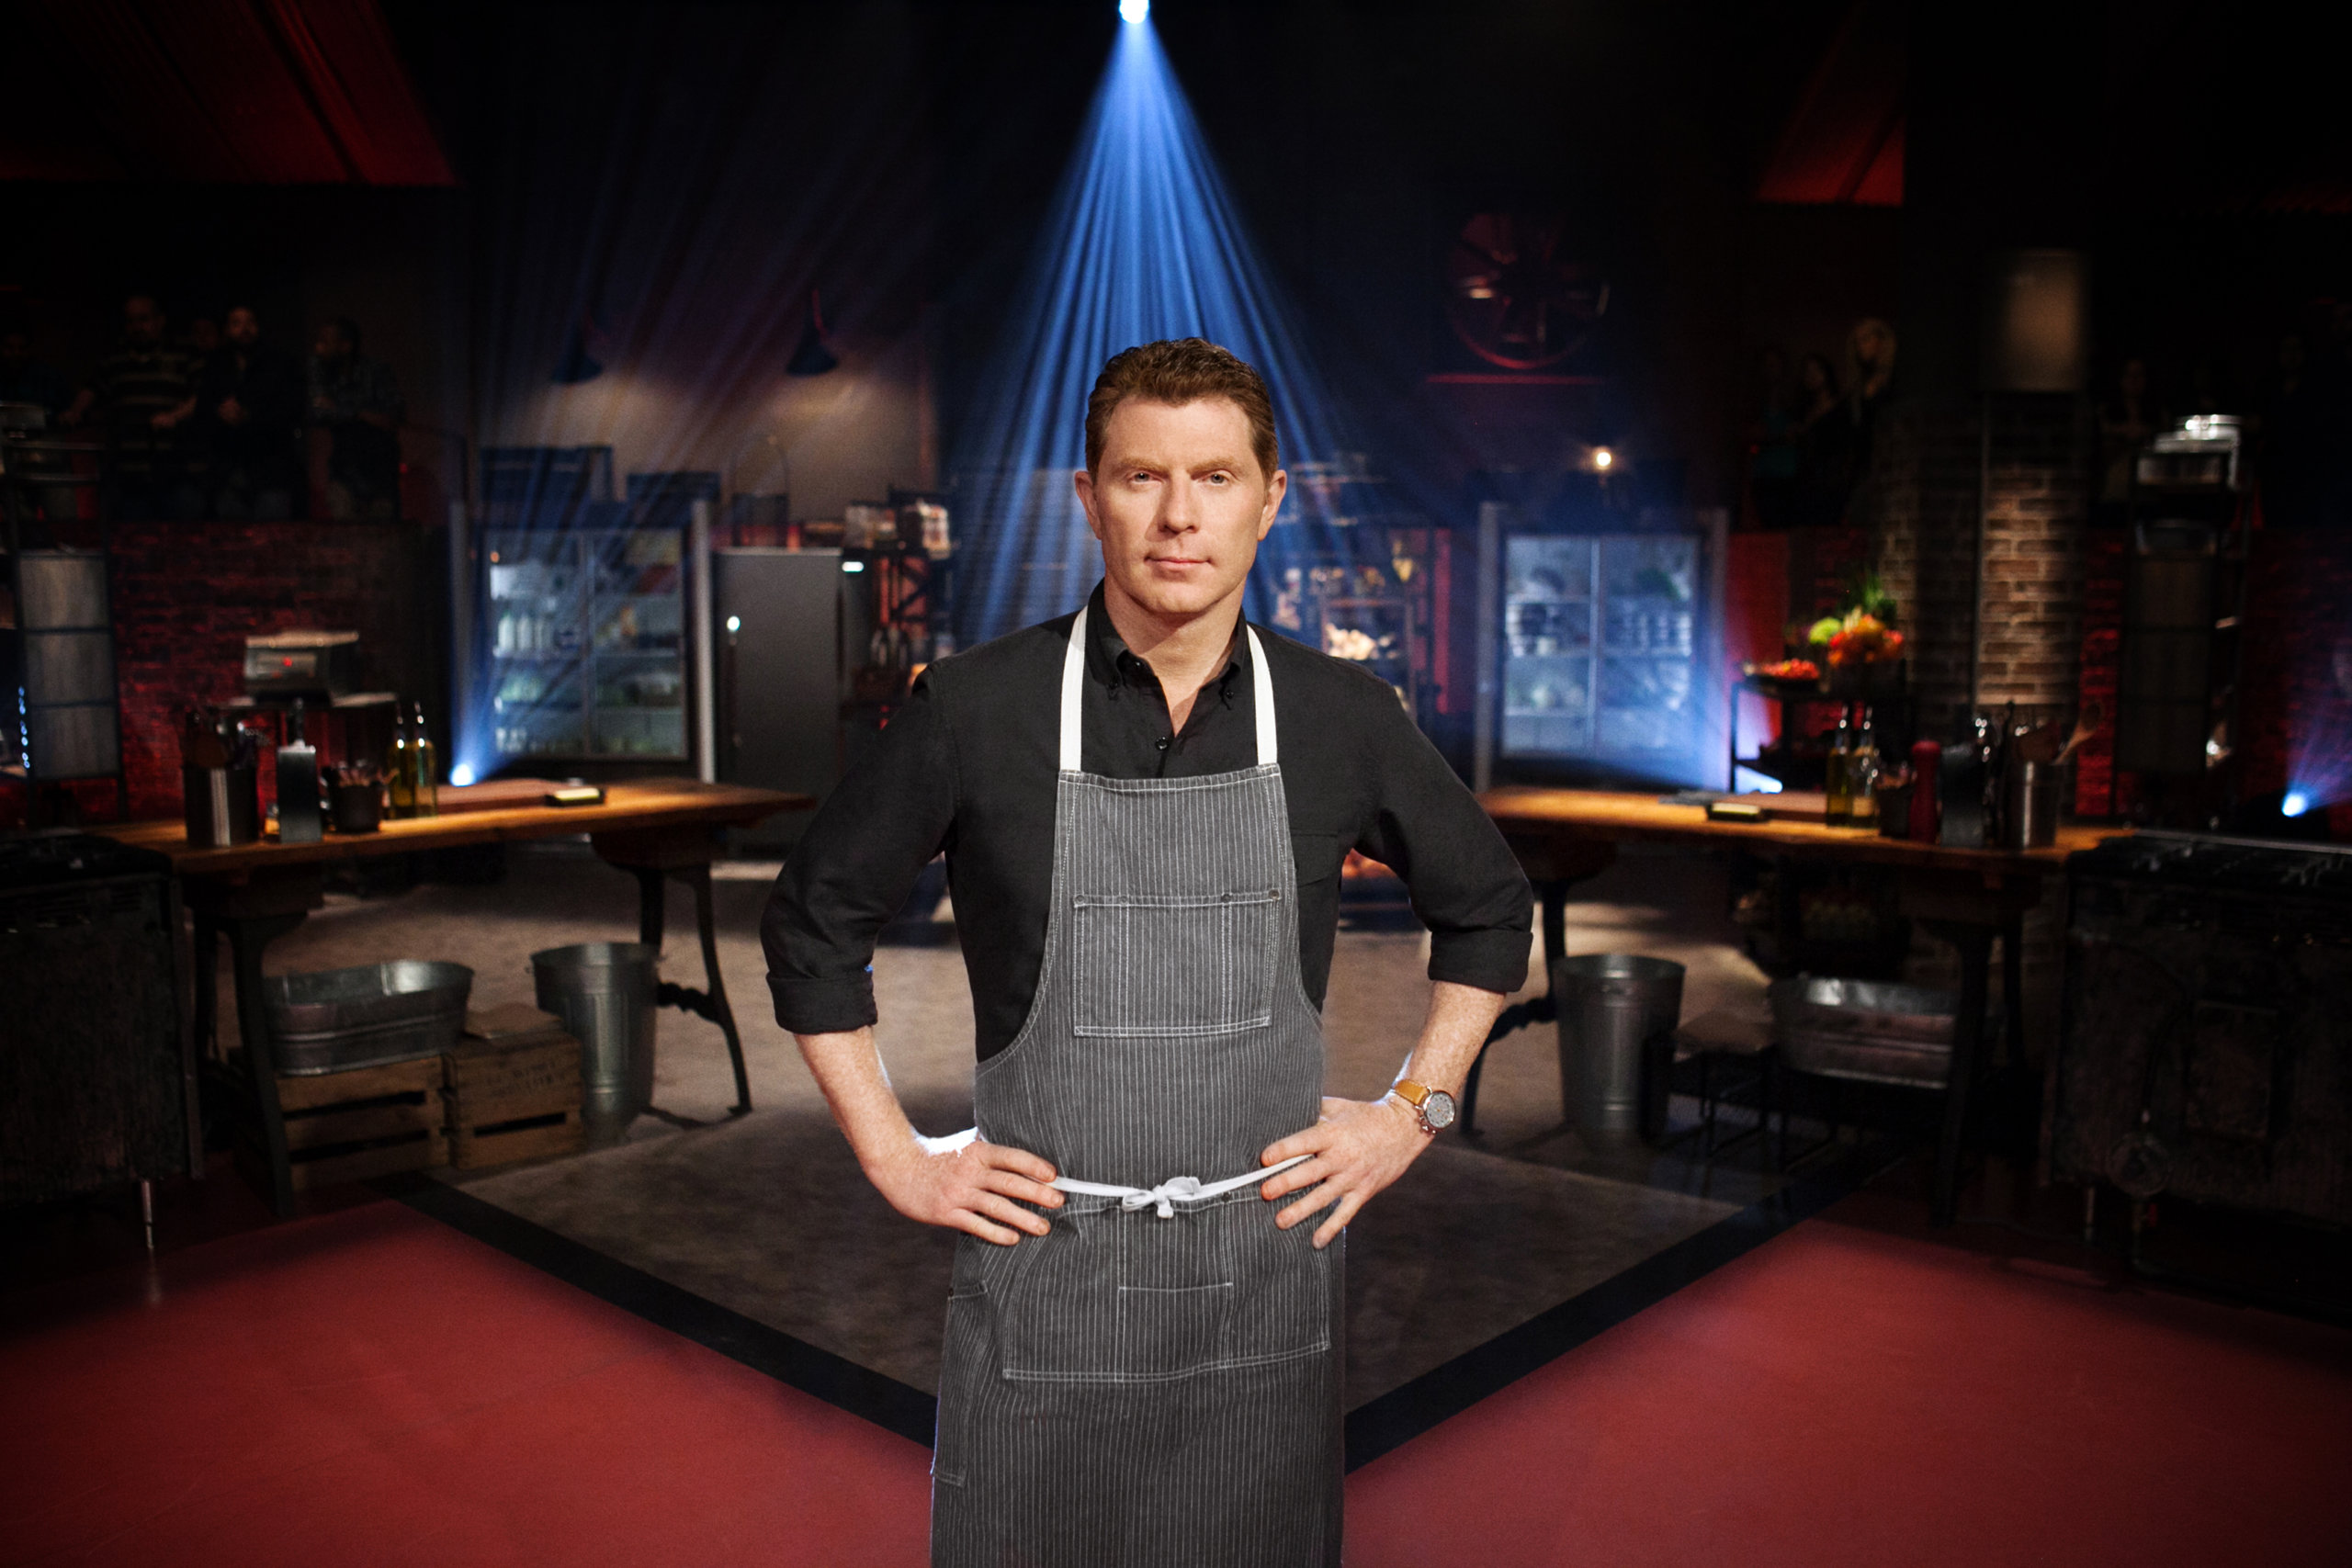 Bobby Flay on the set of his hit Food Network show 